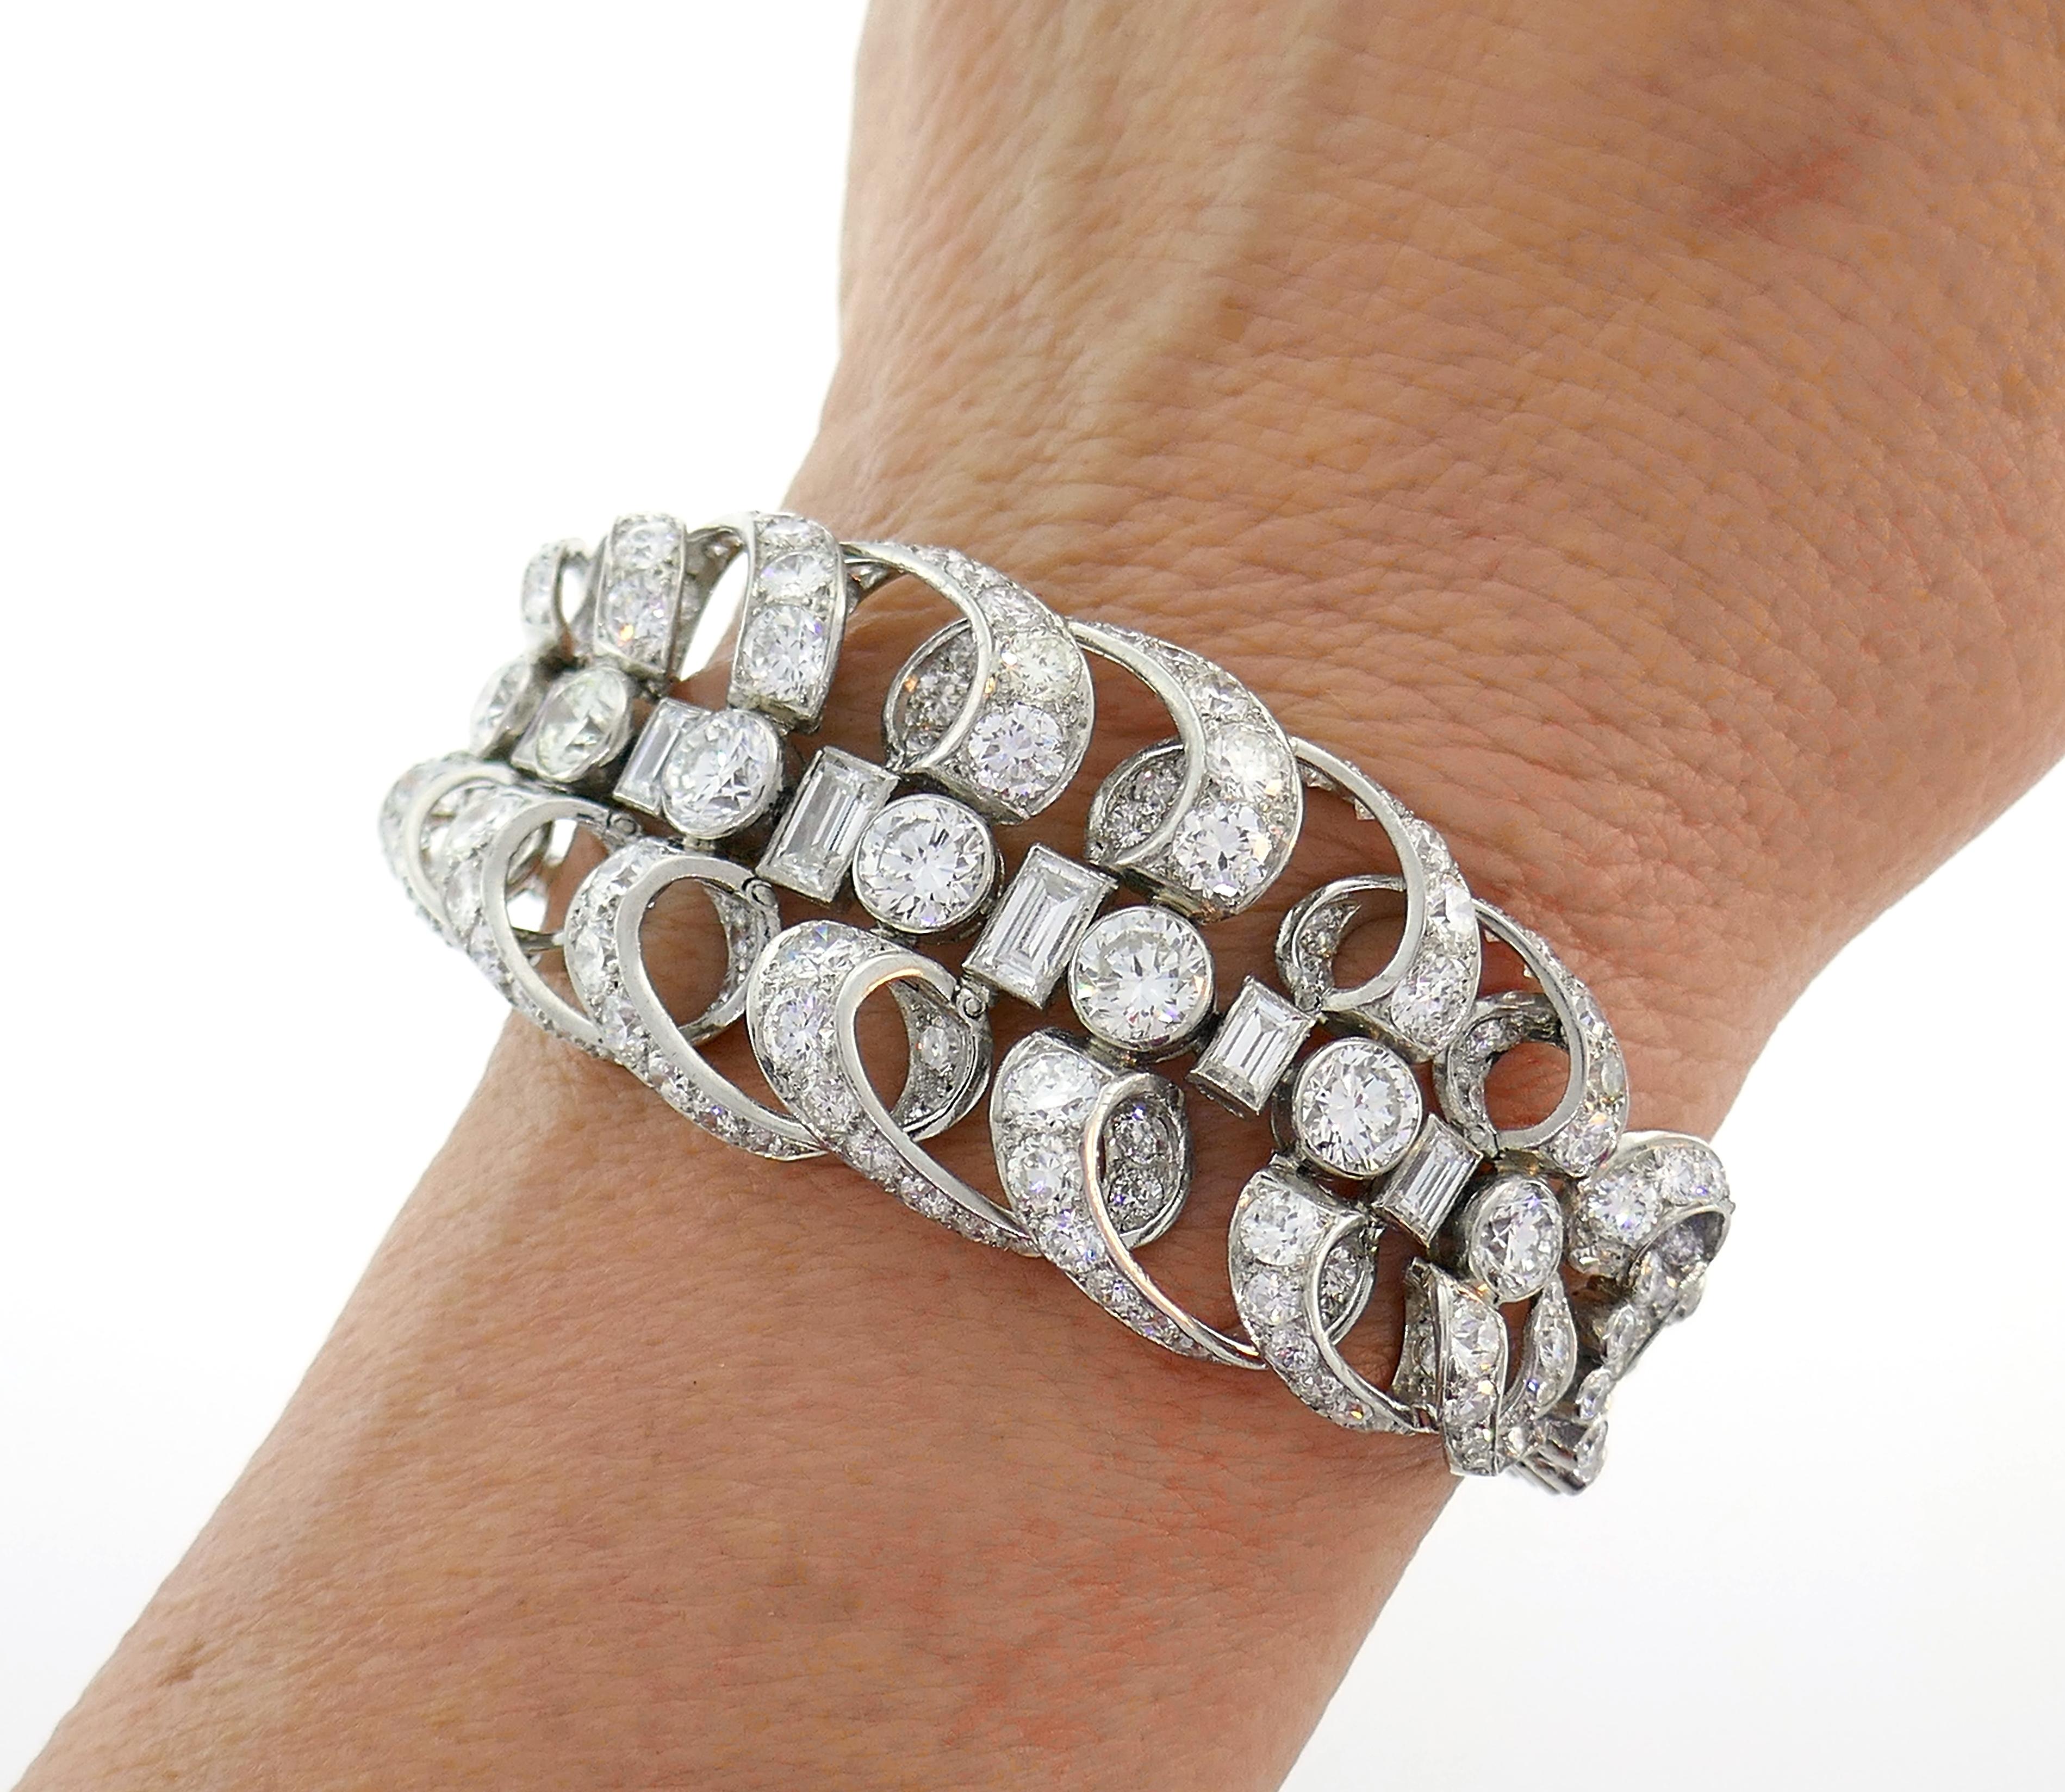 Stunning late Art Deco bracelet created by Chaumet, Paris in the 1930s. It is made of platinum and set with transitional round brilliant cut and baguette cut diamonds. The diamonds are of F-G-H color VS clarity, total weight is approximately 18.50